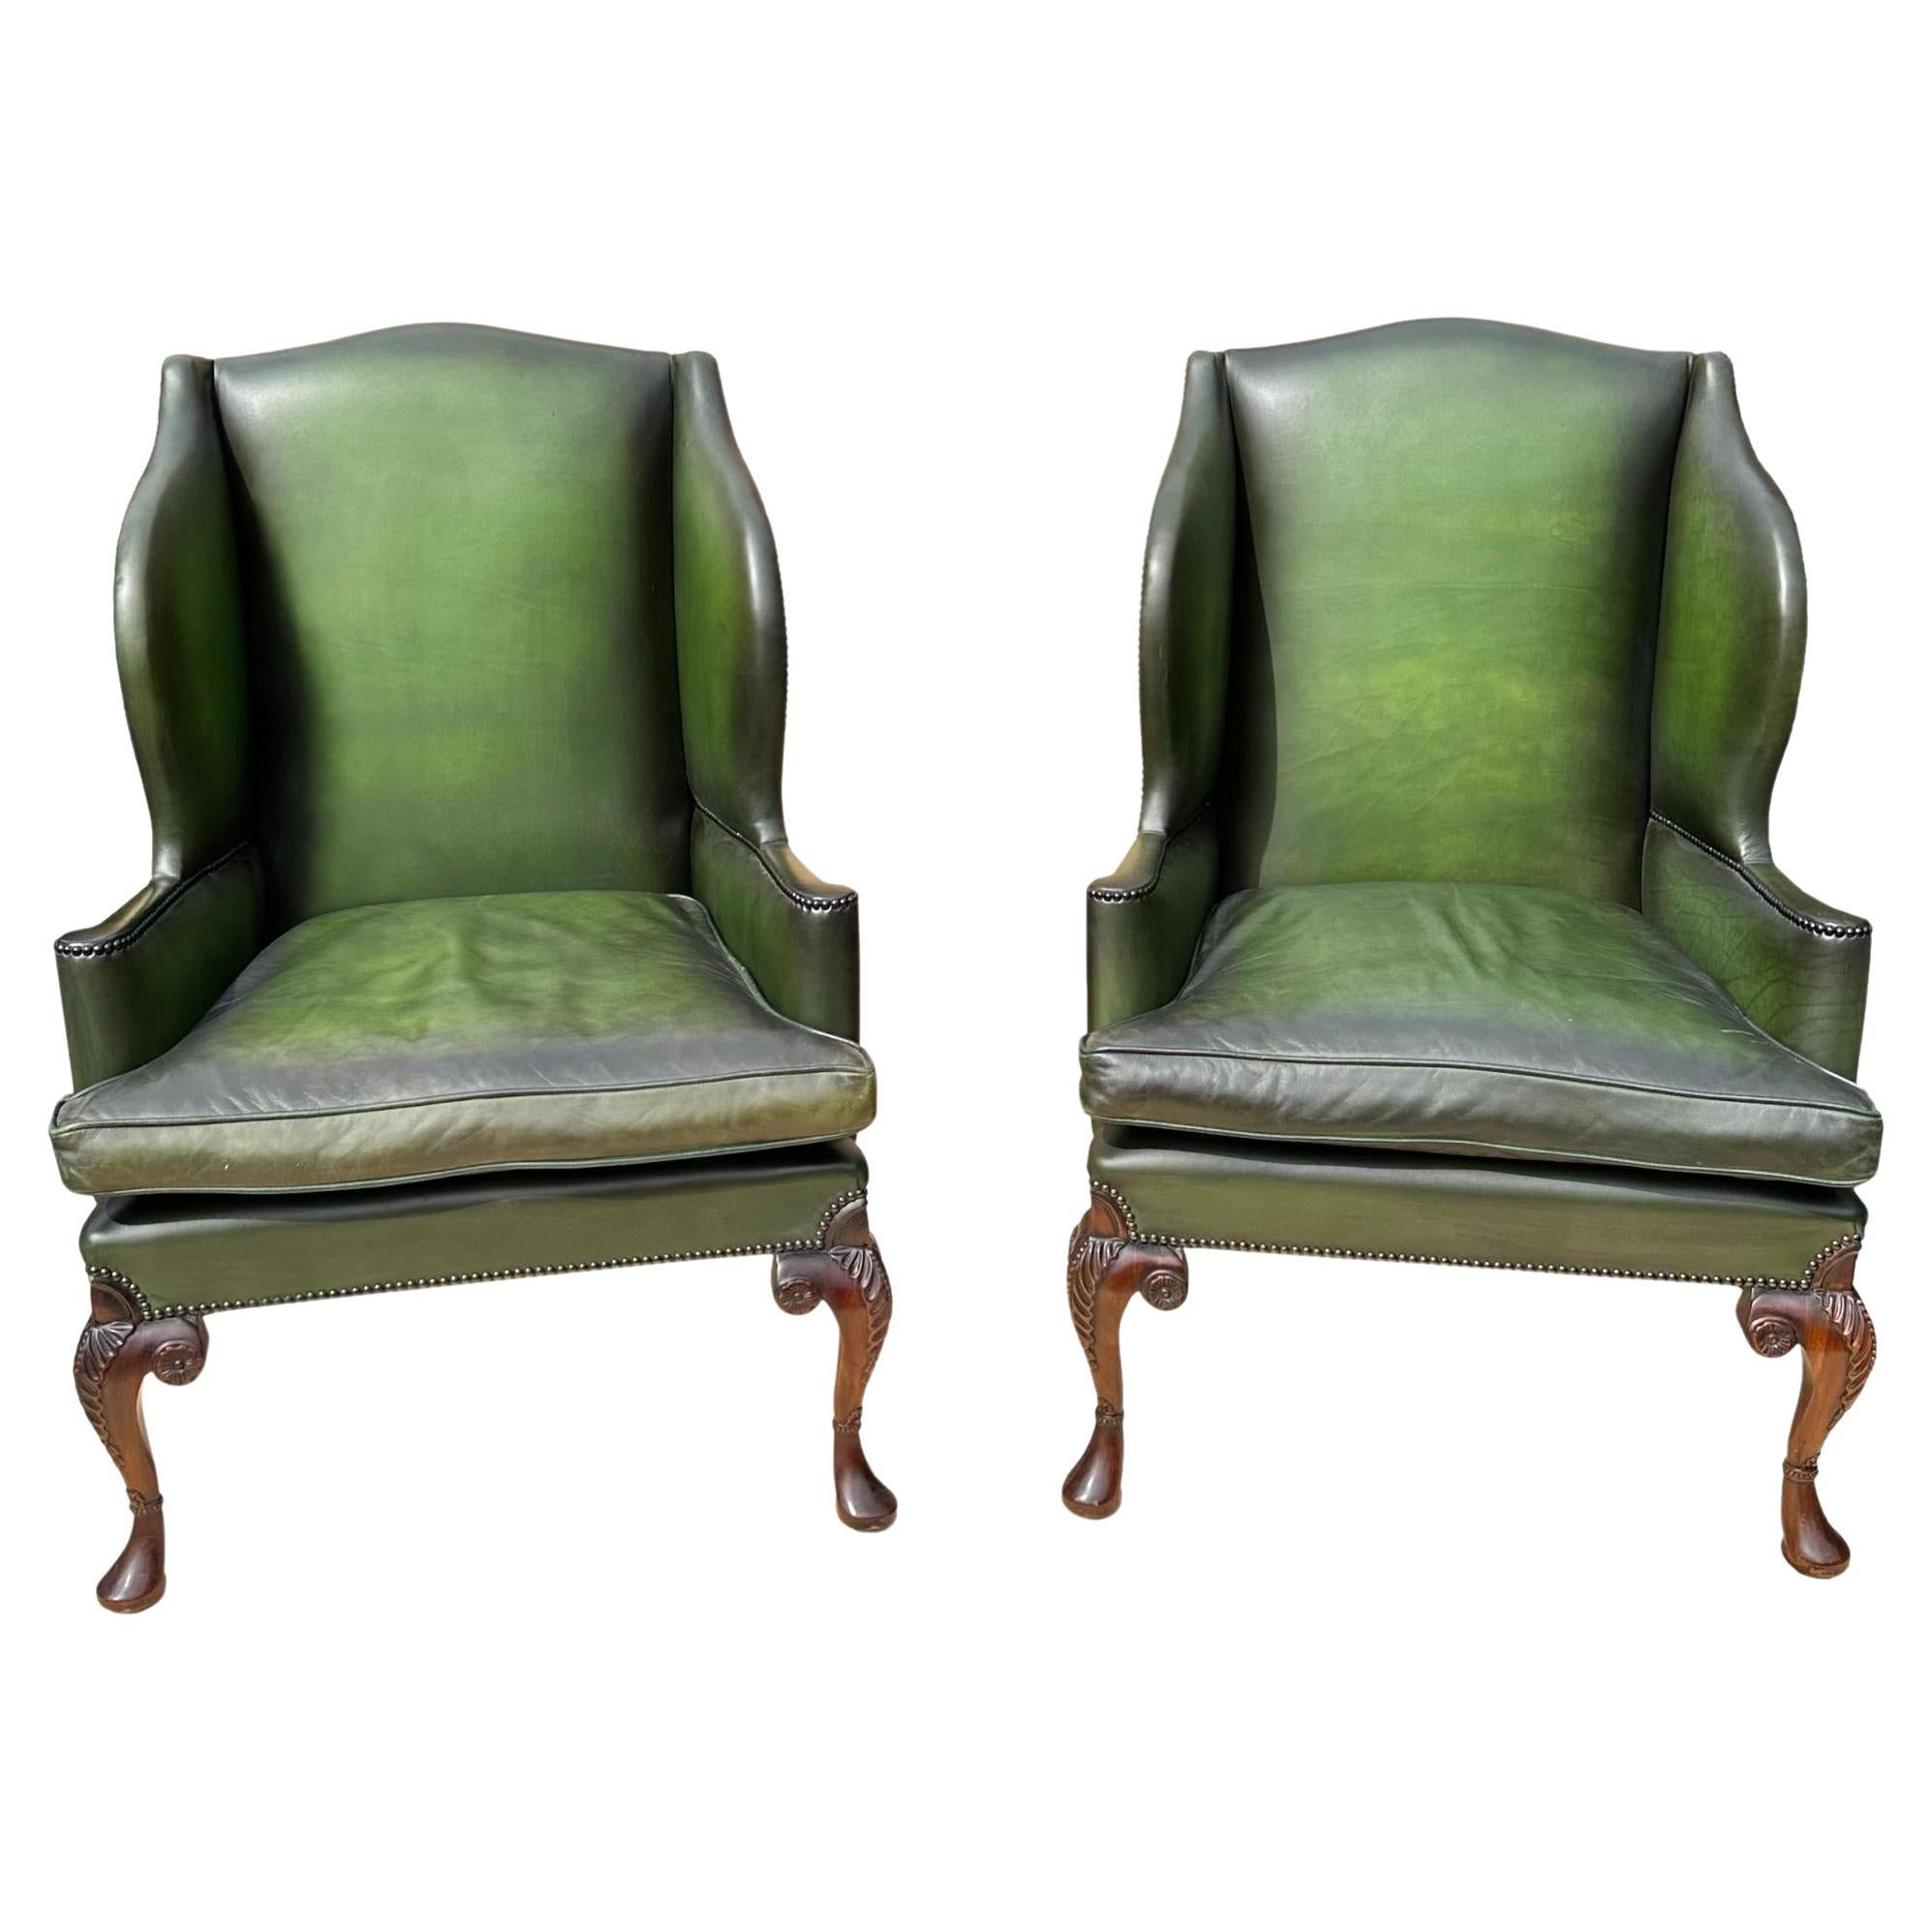 Pair of Edwardian Green Leather Wing Back Chairs, English, ca. 1920.